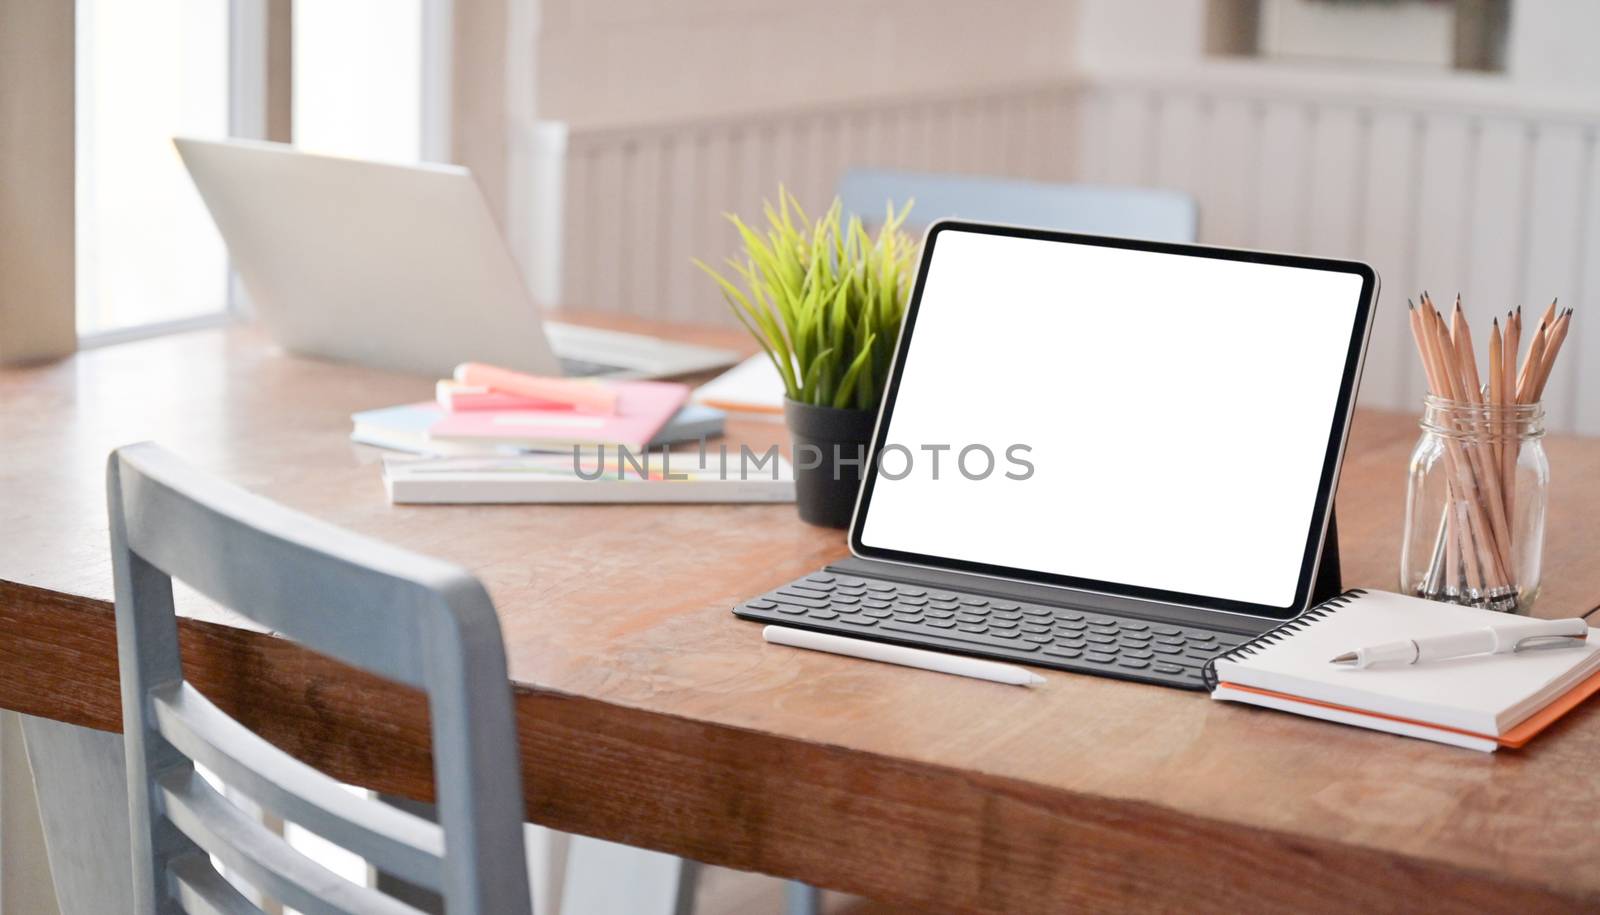 Mock up modern tablet and office equipment on the desk in a comf by poungsaed